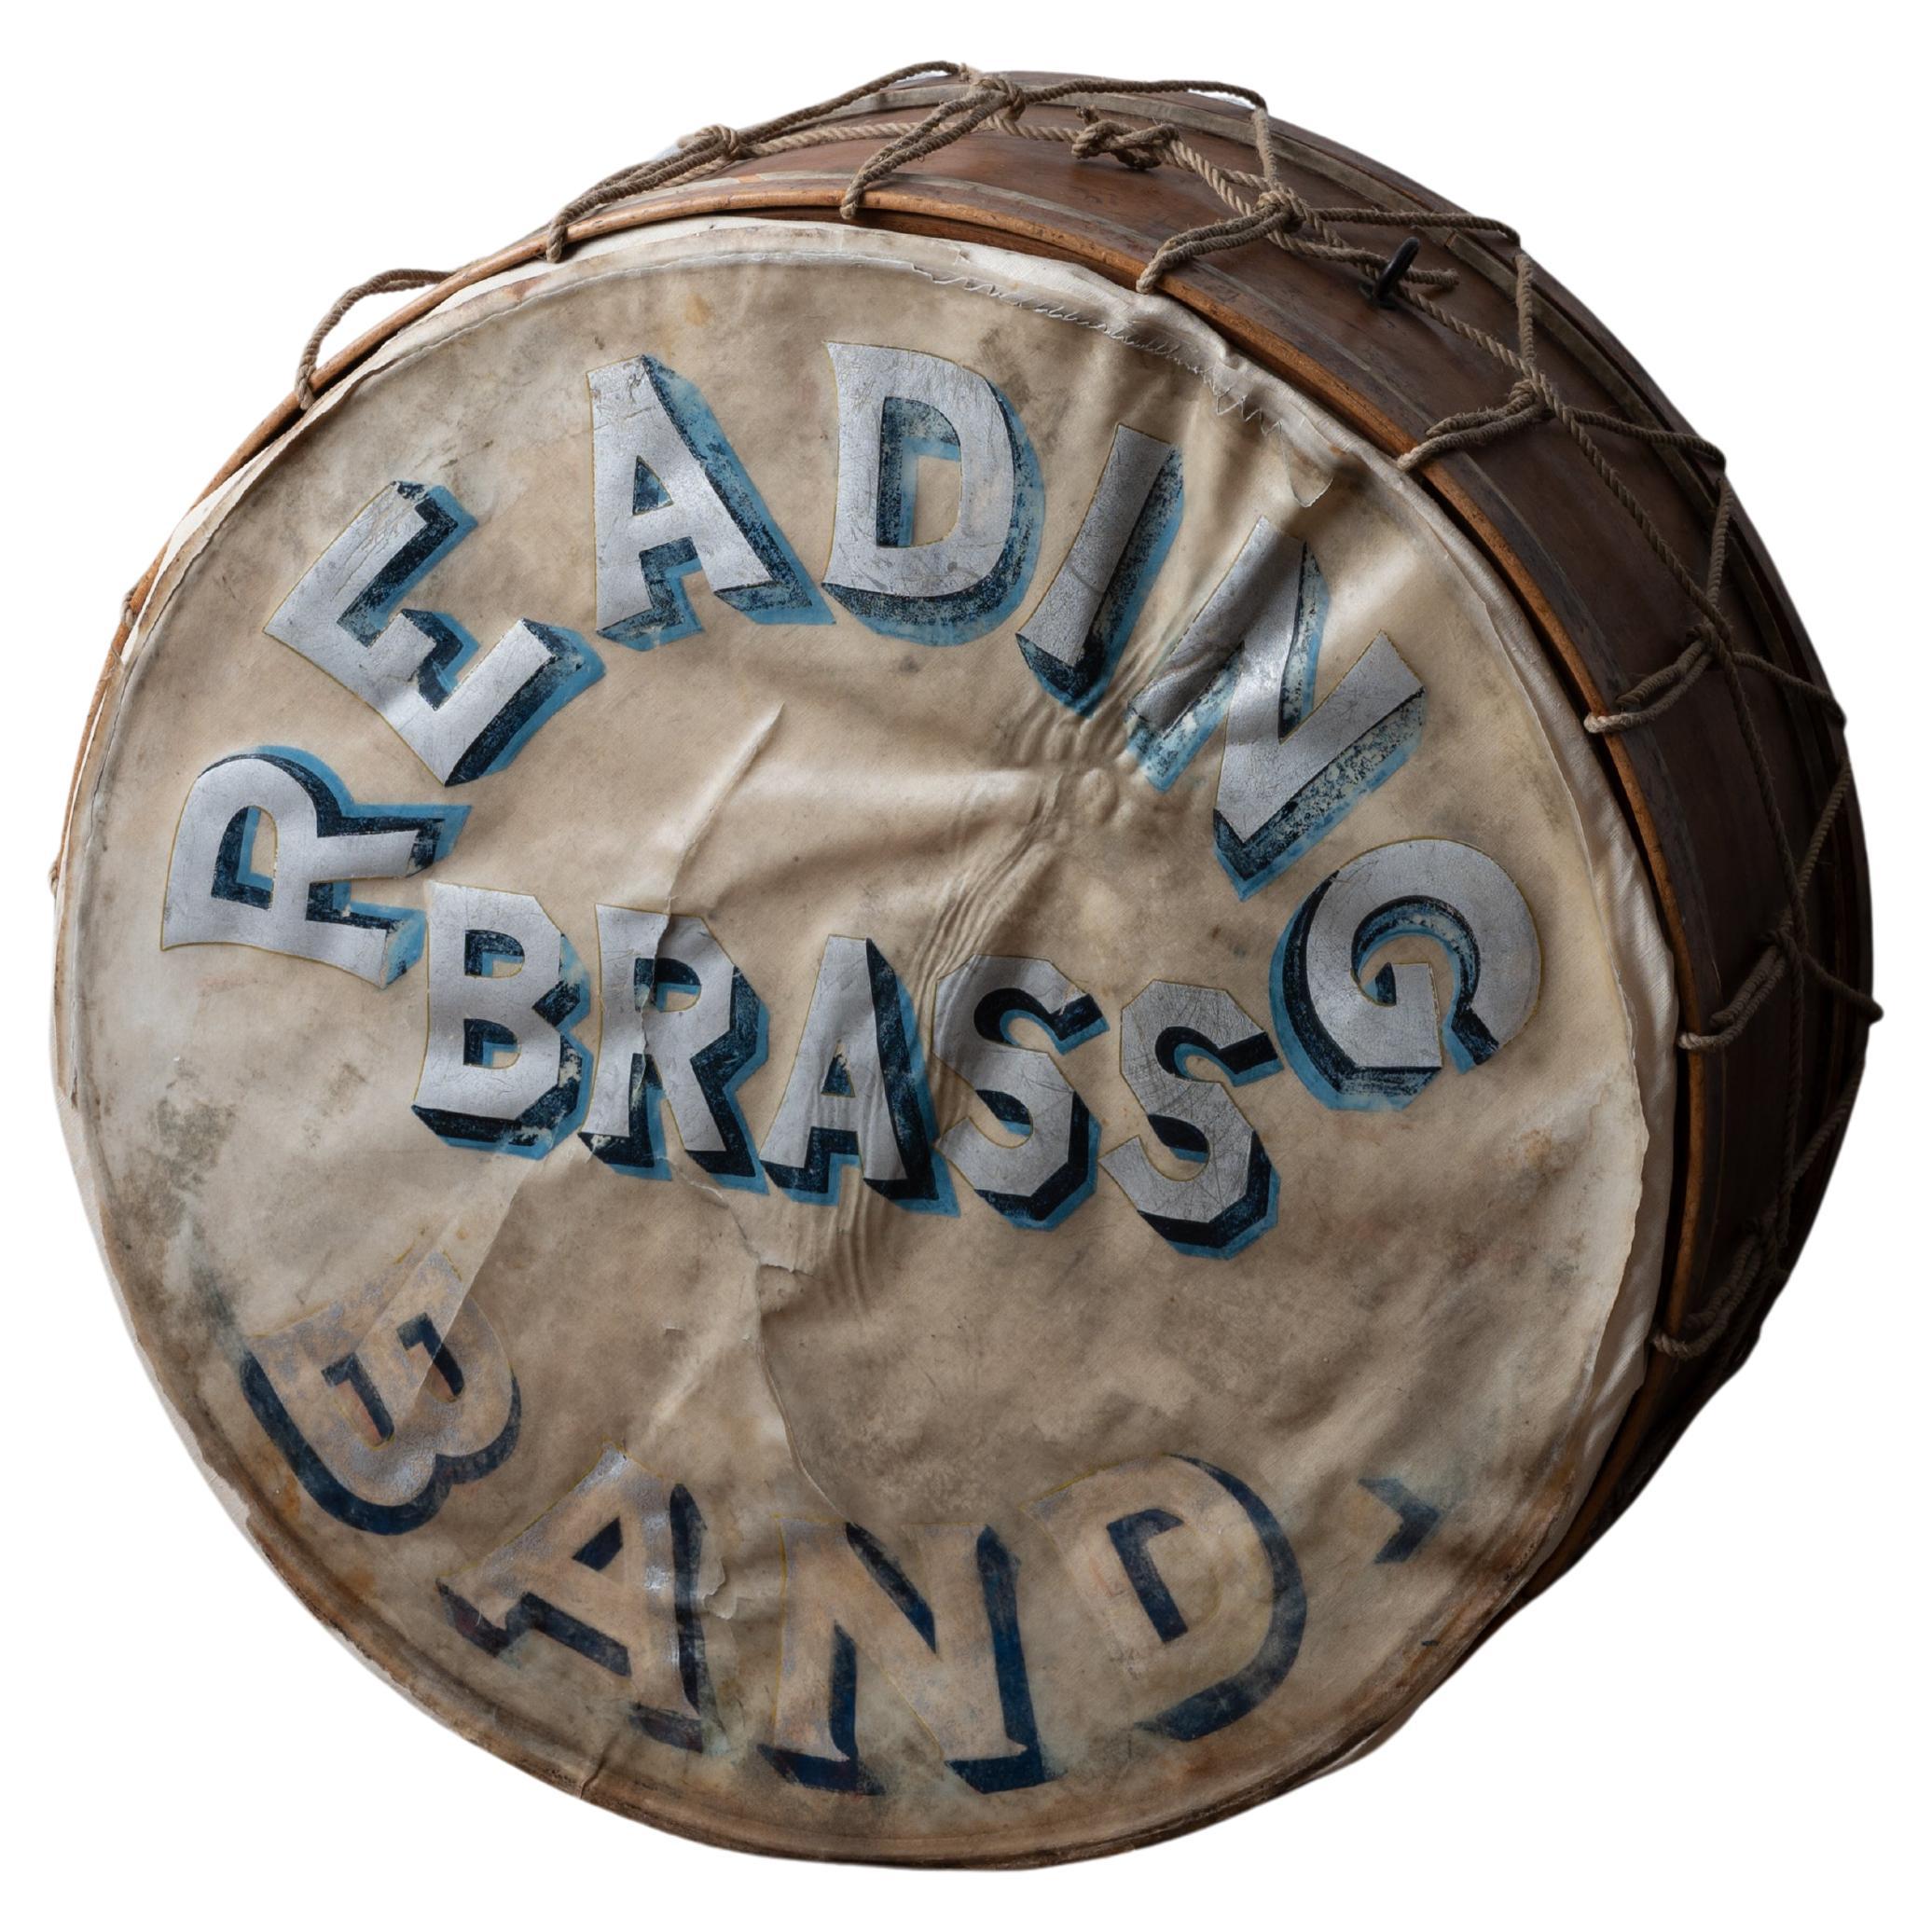 J.B. Treat “Reading Brass Band" Drum, c.1860s For Sale